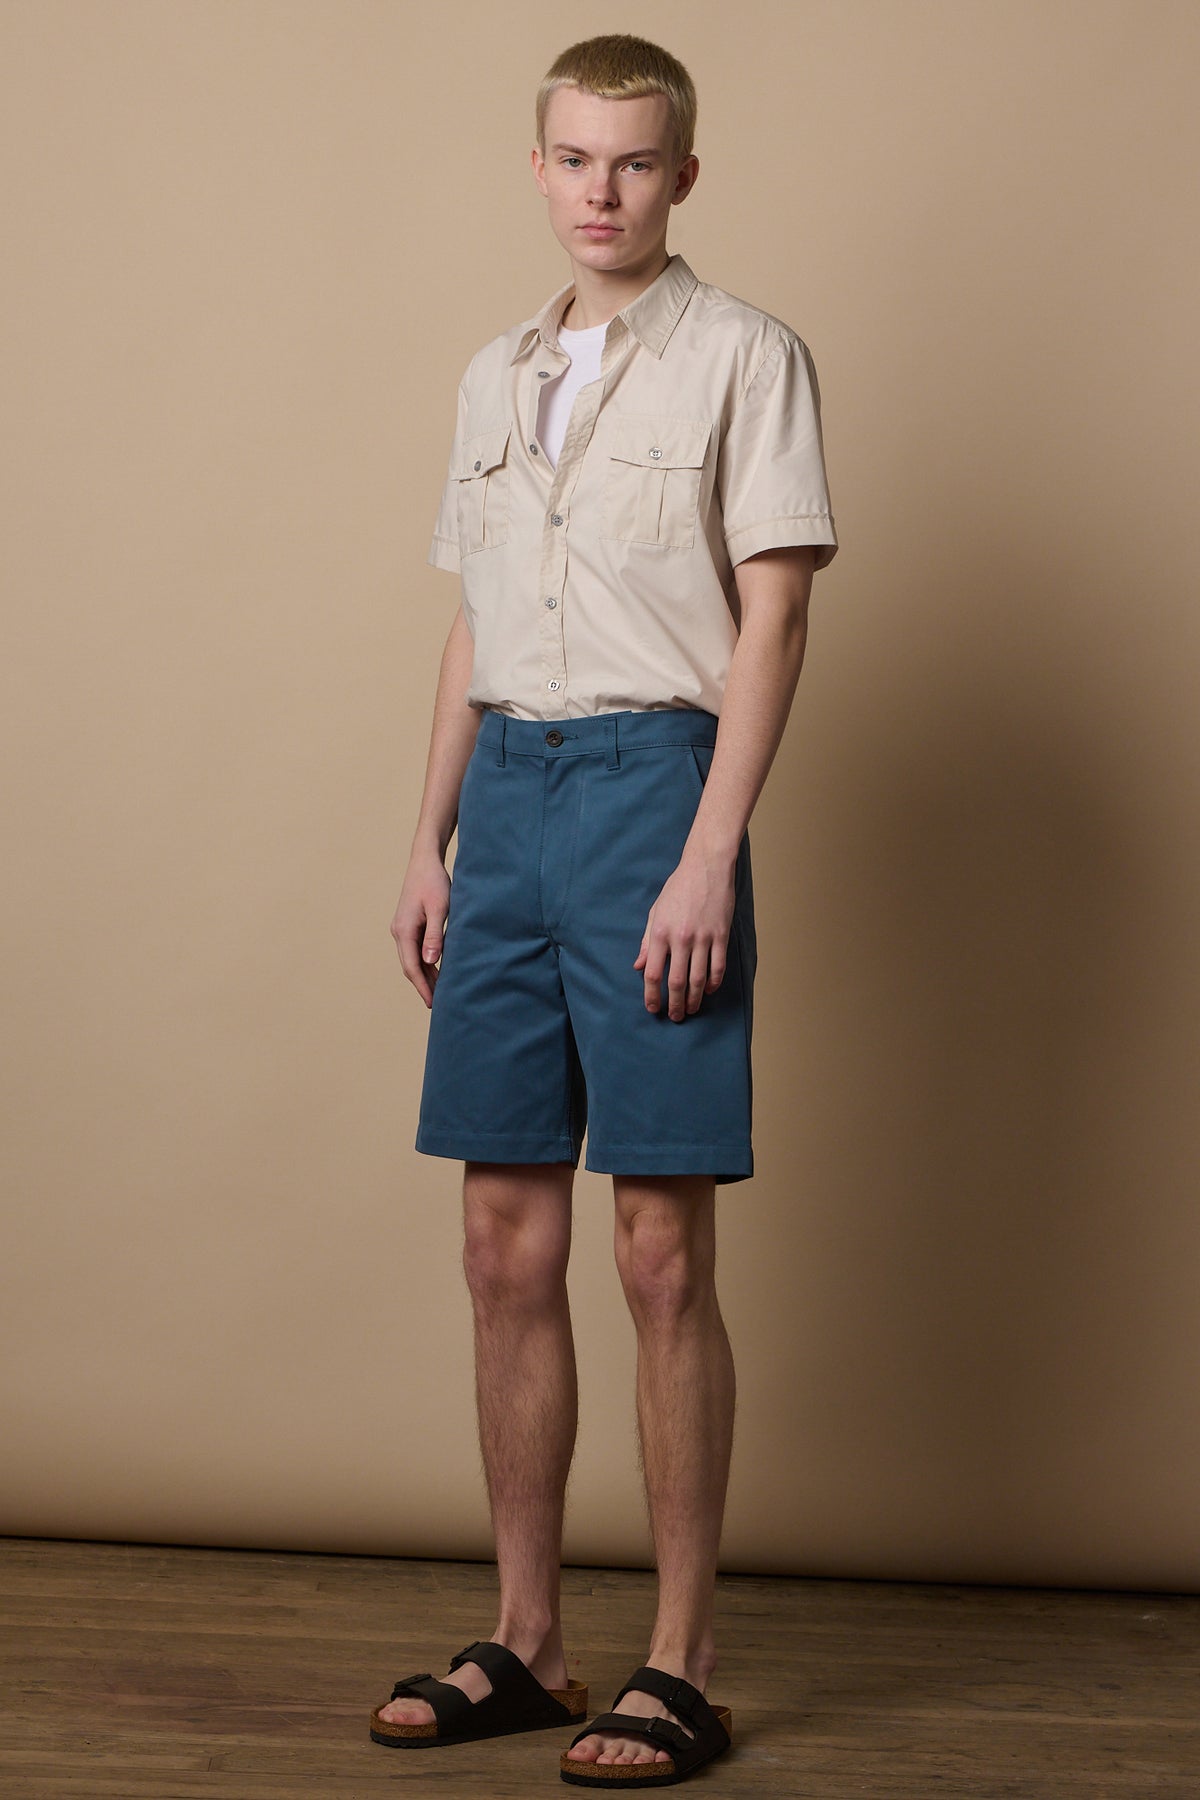 
            Full body image of white male with short blonde hair wearing shirt tucked into classic shorts in RAF blue and Birkenstock sandles